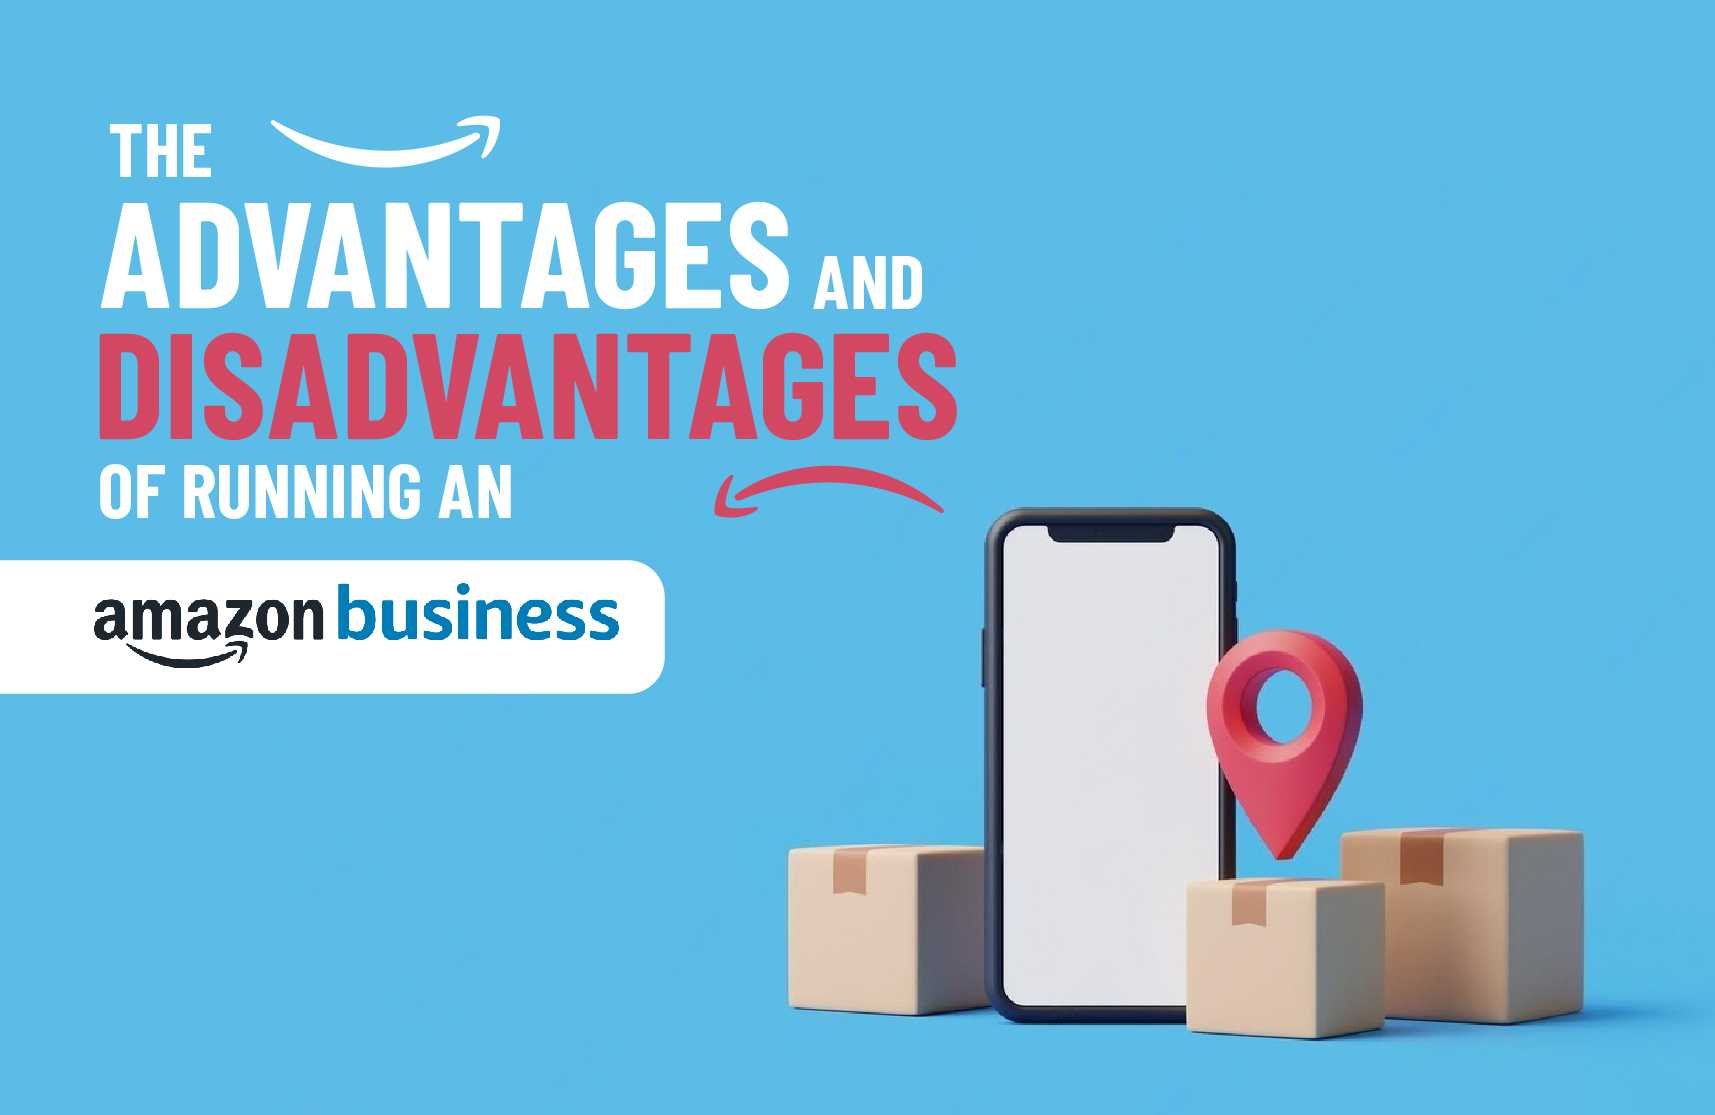 The Advantages and Disadvantages of Running an Amazon Business